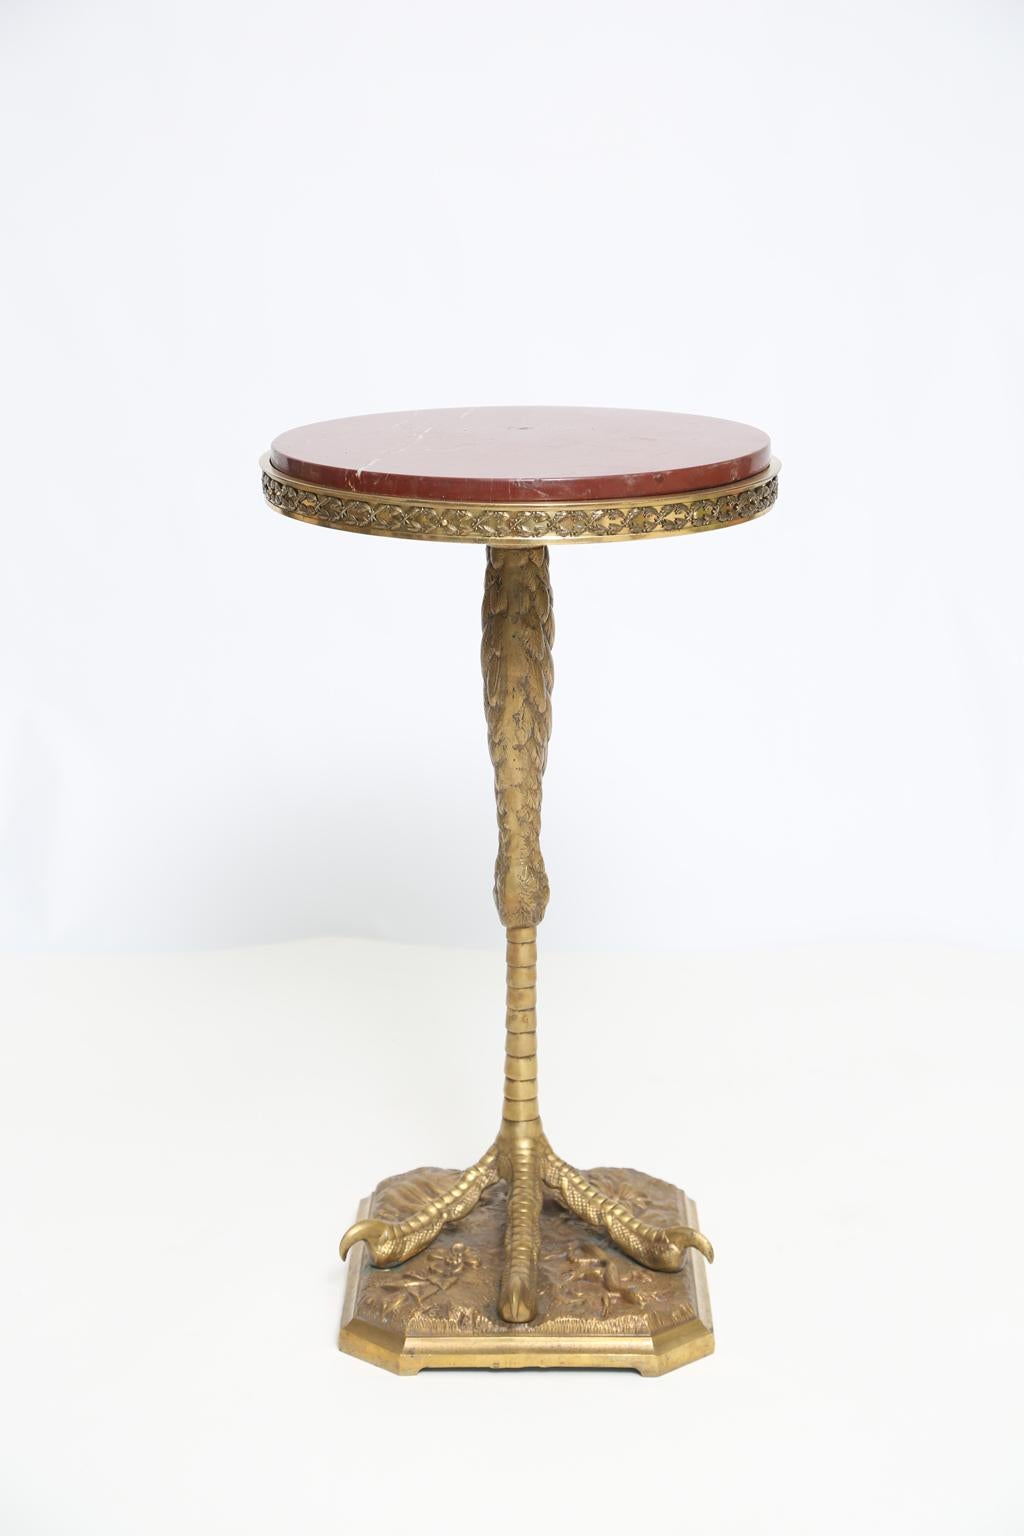 A rare, finely chased, occasional table, by the P.E. Guerin Company (Pierre Emmanuel Guerin, France, United States, 1833-1911), having round top of Rosso Verona marble, inset in bronze frame, raised on beautifully detailed ostrich leg and talon, on